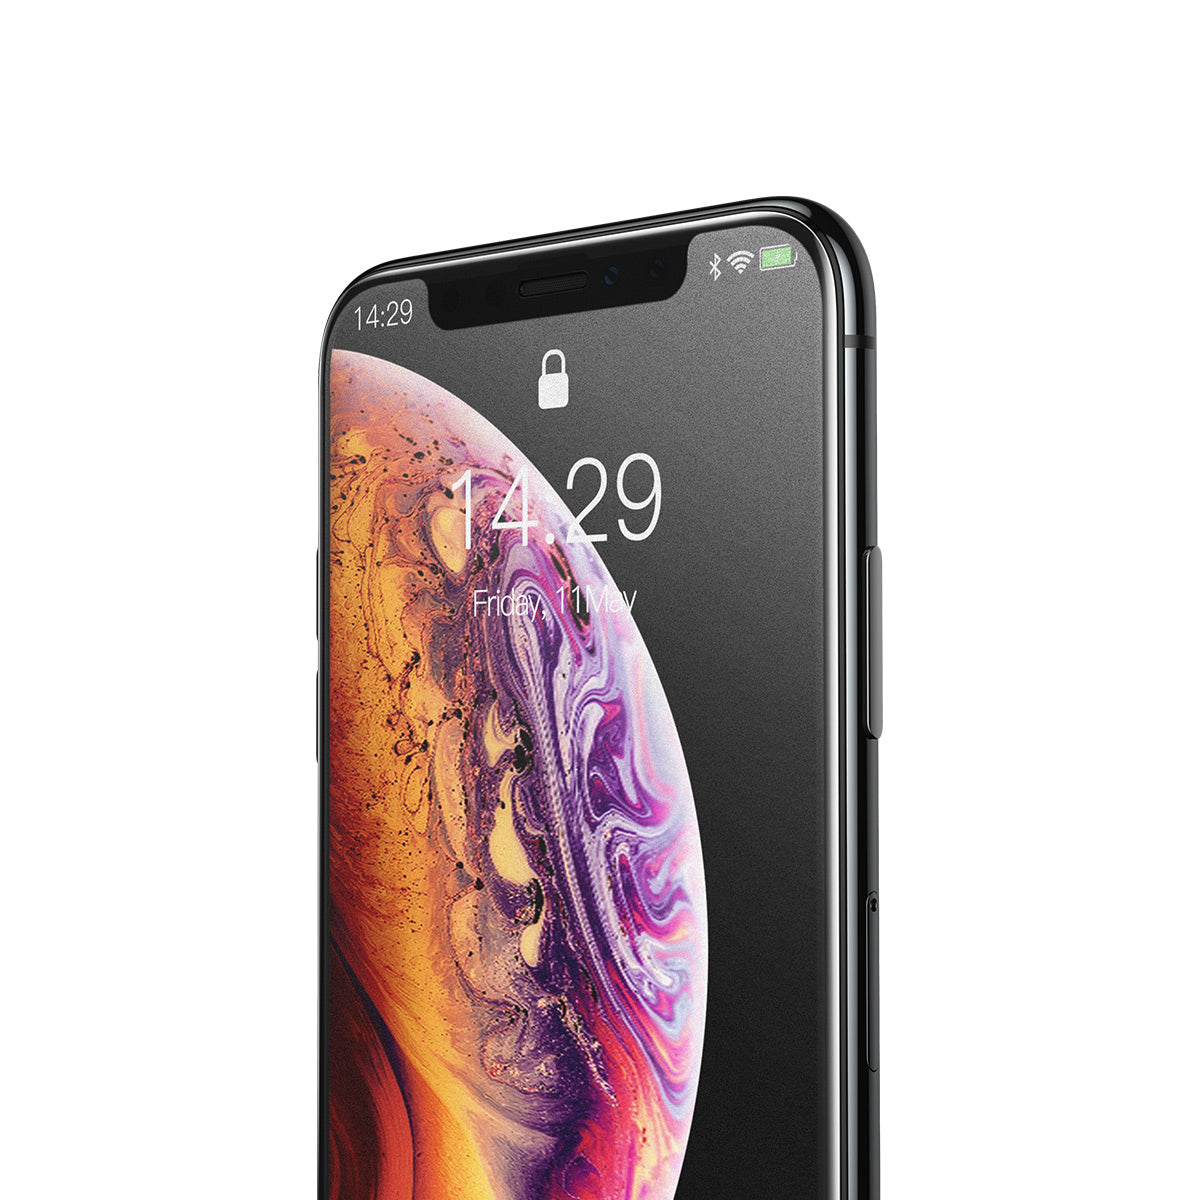 BASEUS 0.3mm full-screen curved frosted tempered glass protector for iPhone 11 Pro Max / iPhone 11 Pro / iPhone XS Max / iPhone XS / X